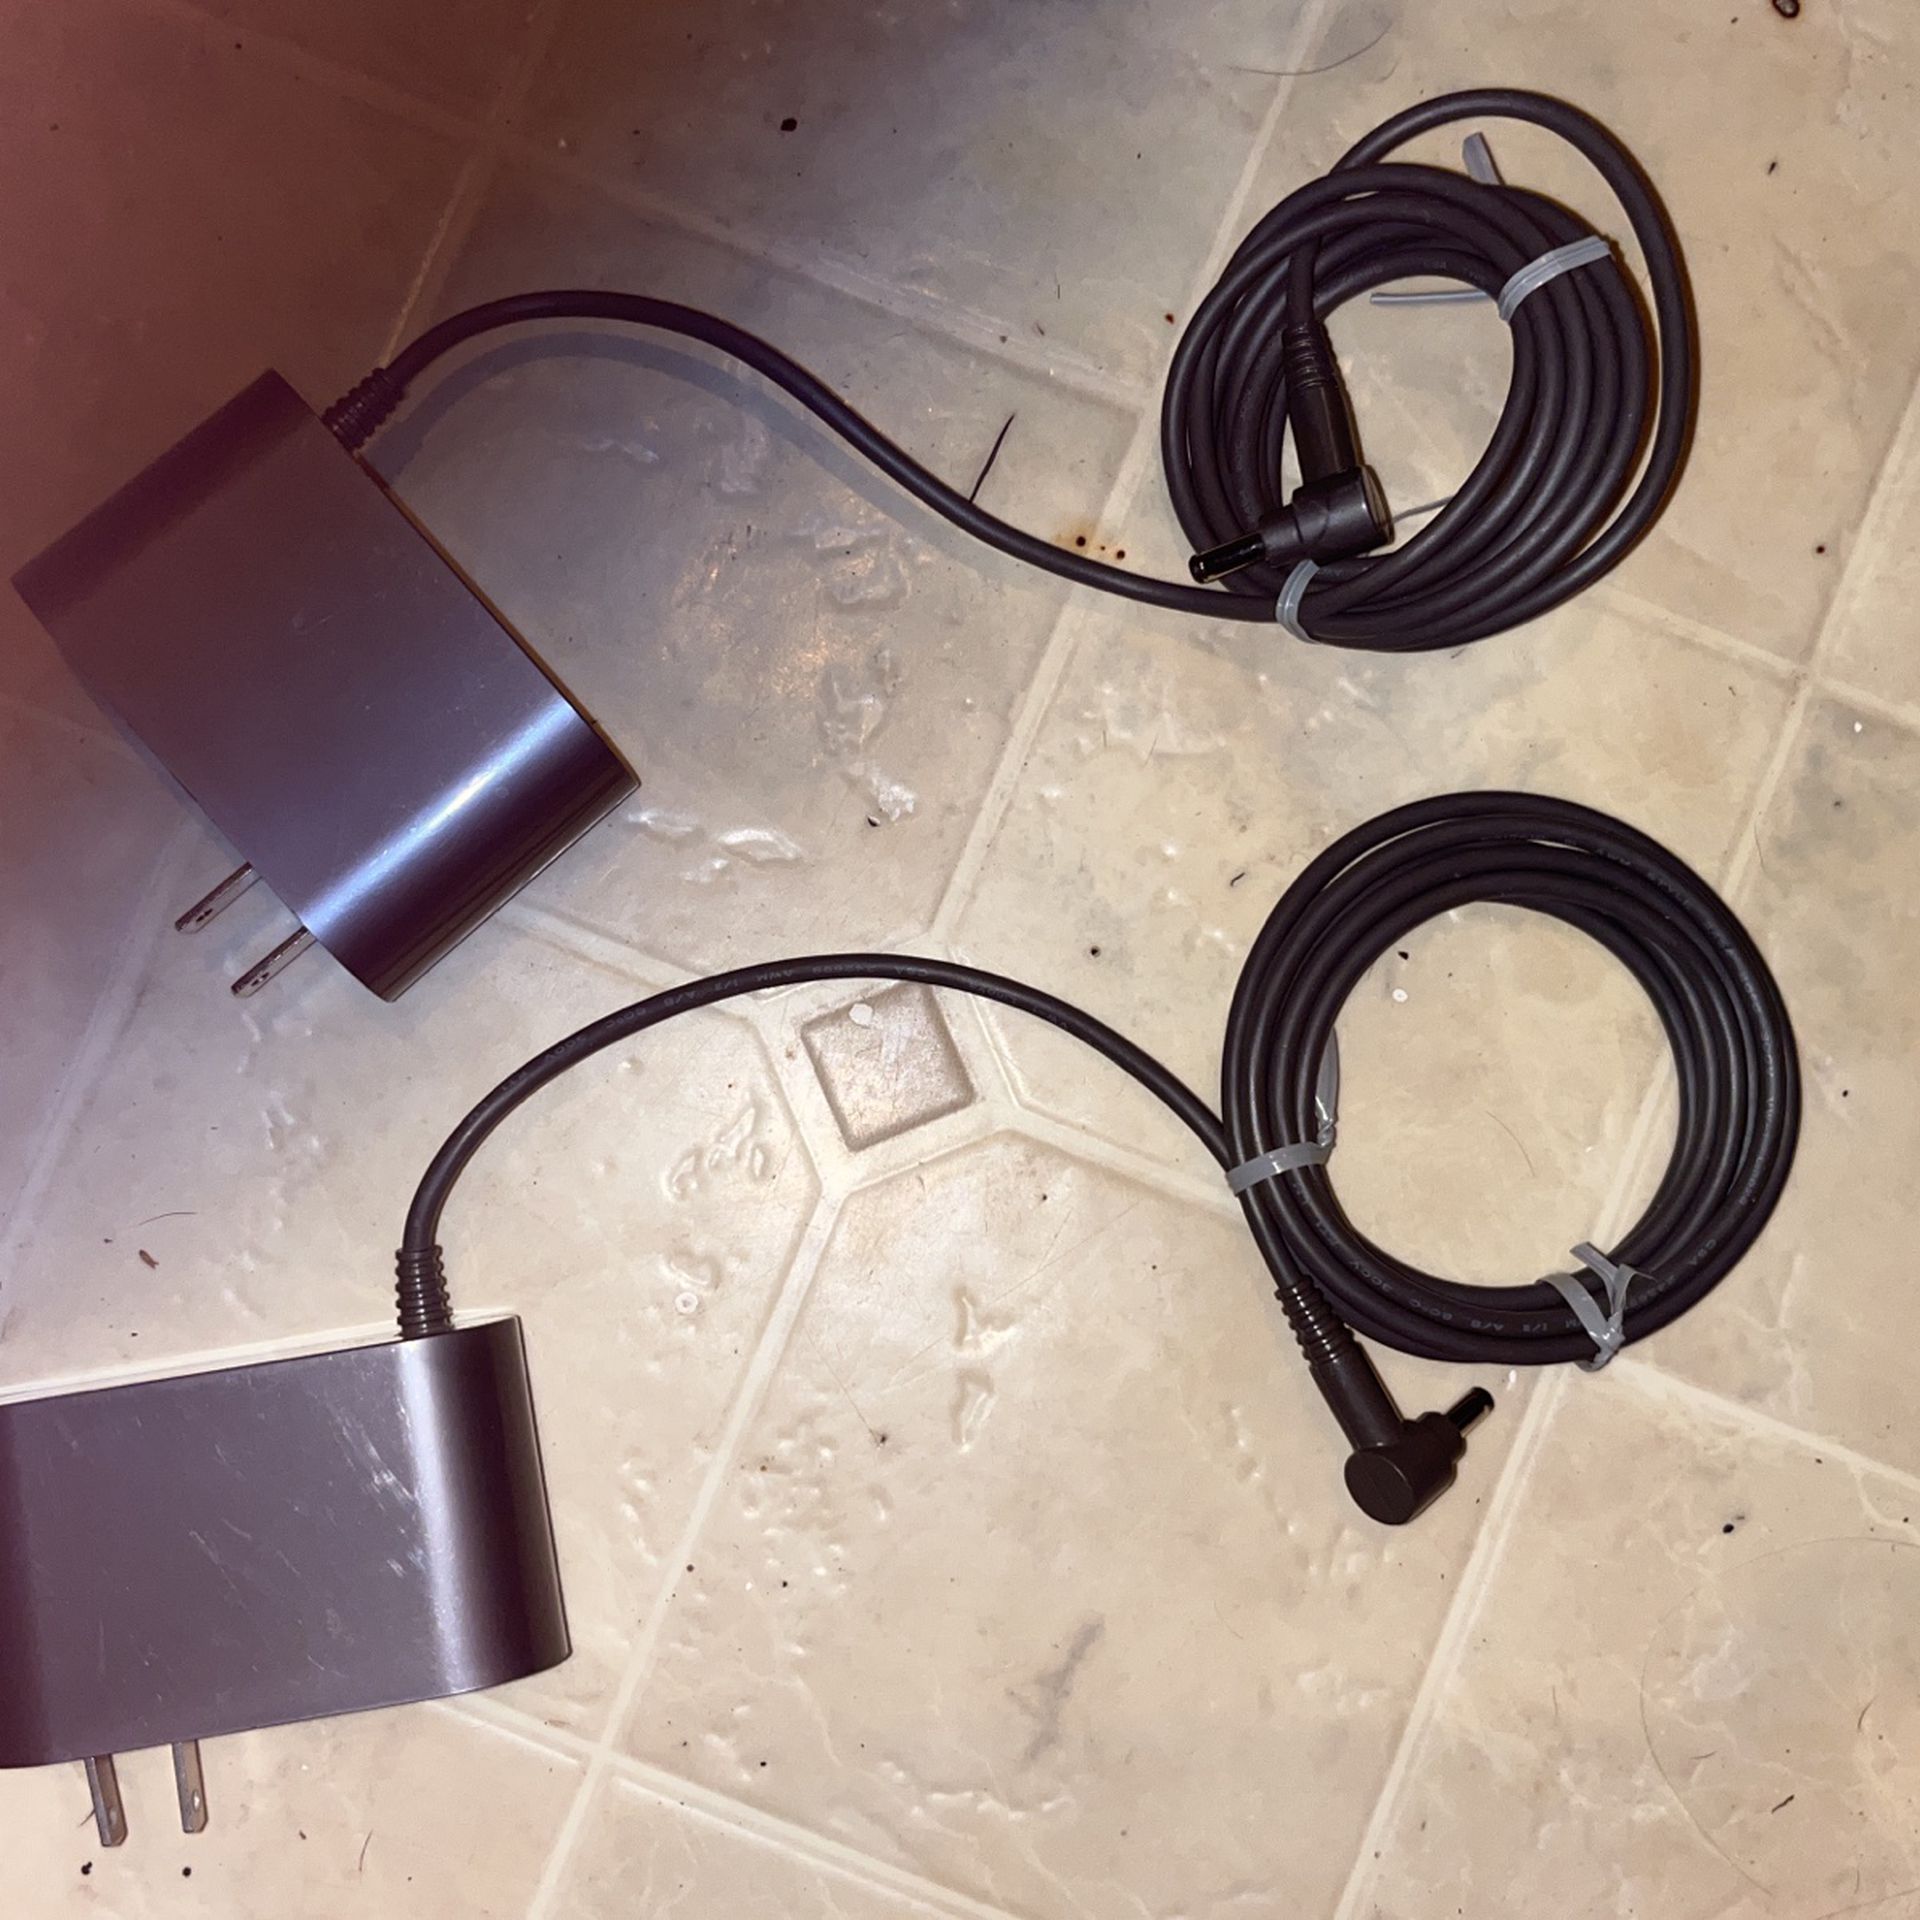 DYSON vacuum Chargers